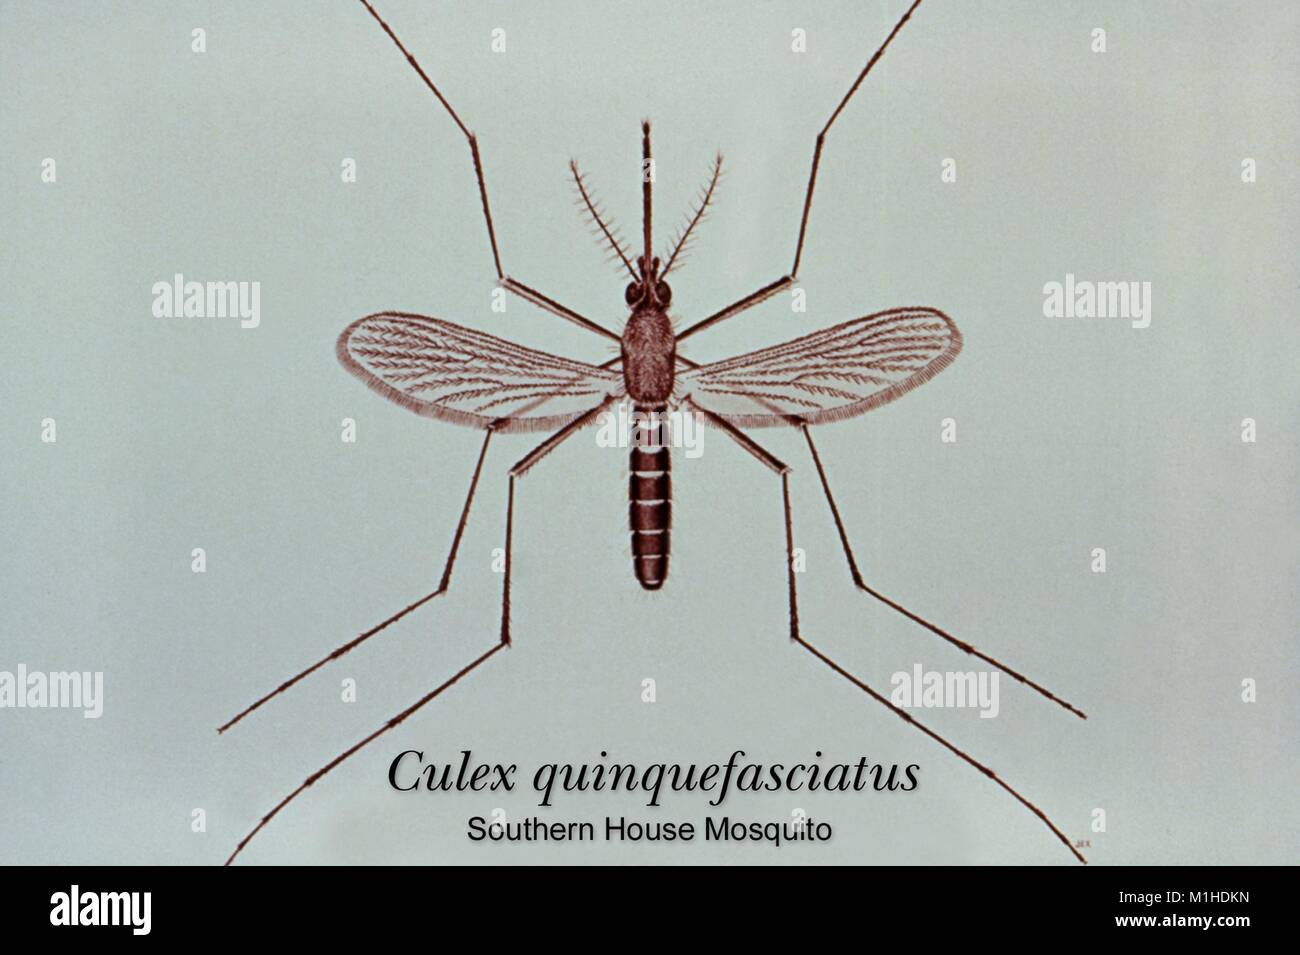 Illustration of an adult Culex quinquefasciatus mosquito, one of the mosquito species in which West Nile virus has been found, 1976. Image courtesy CDC. () Stock Photo